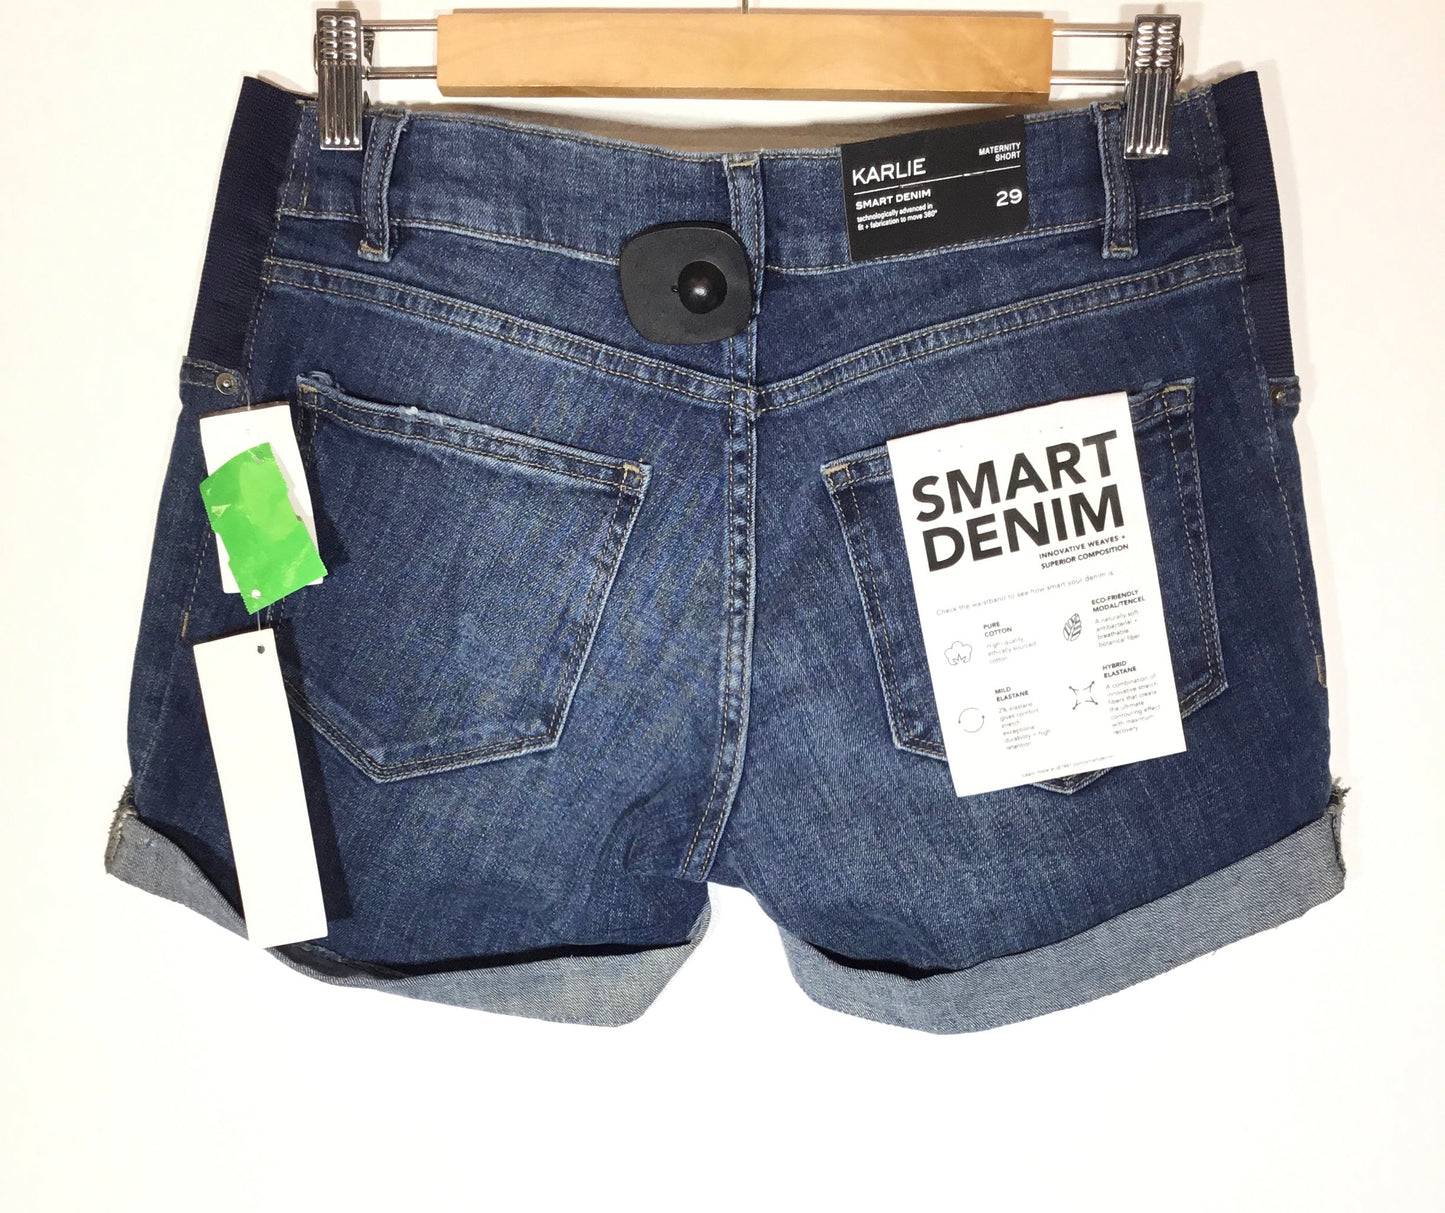 Shorts By Dl1961  Size: 8